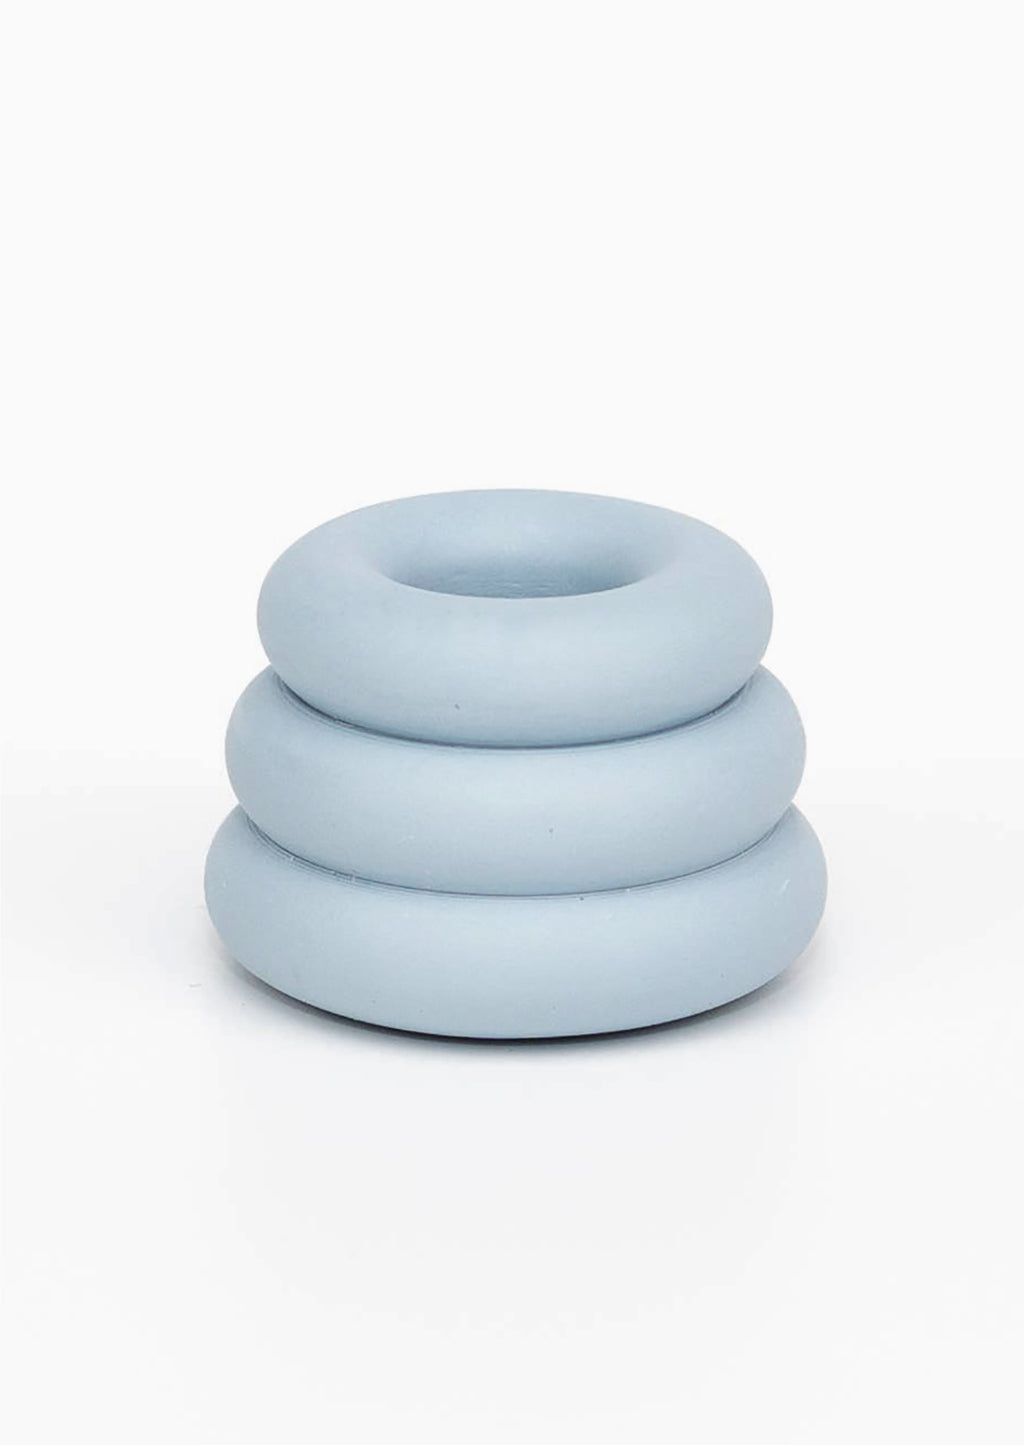 Sky Blue: A taper candle holder with 3-layer stacked donut shape in sky blue.